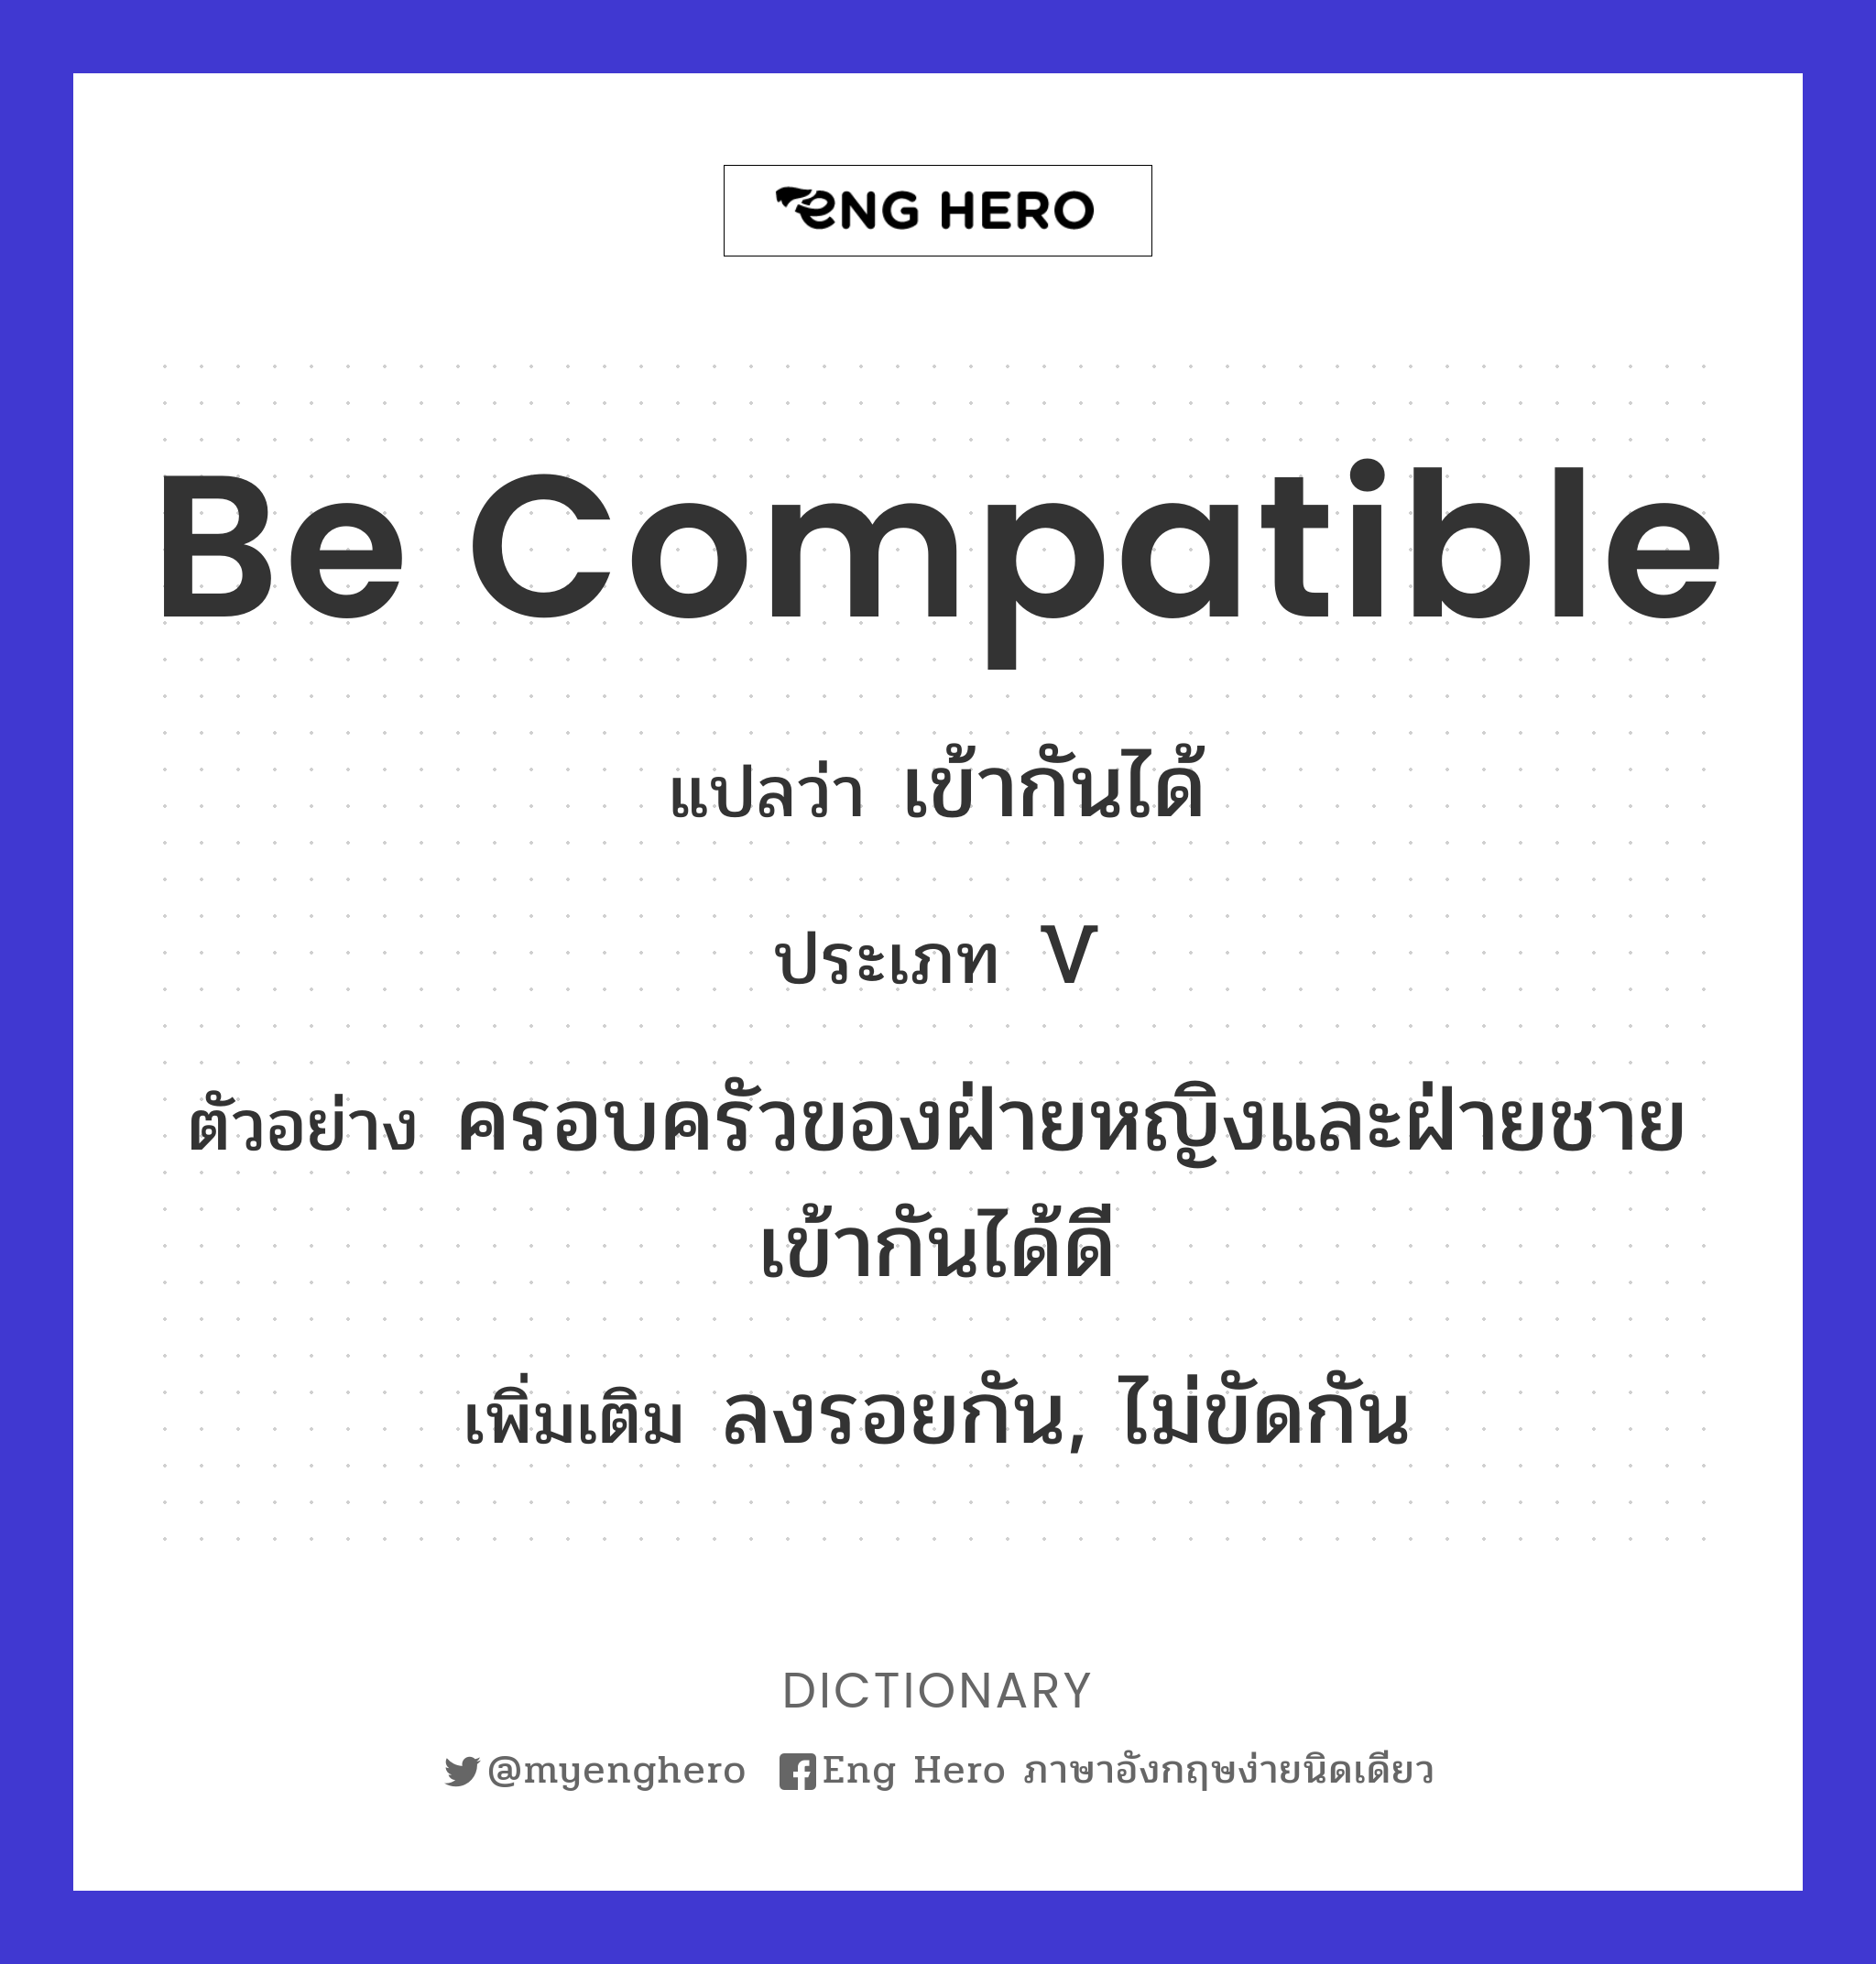 be compatible